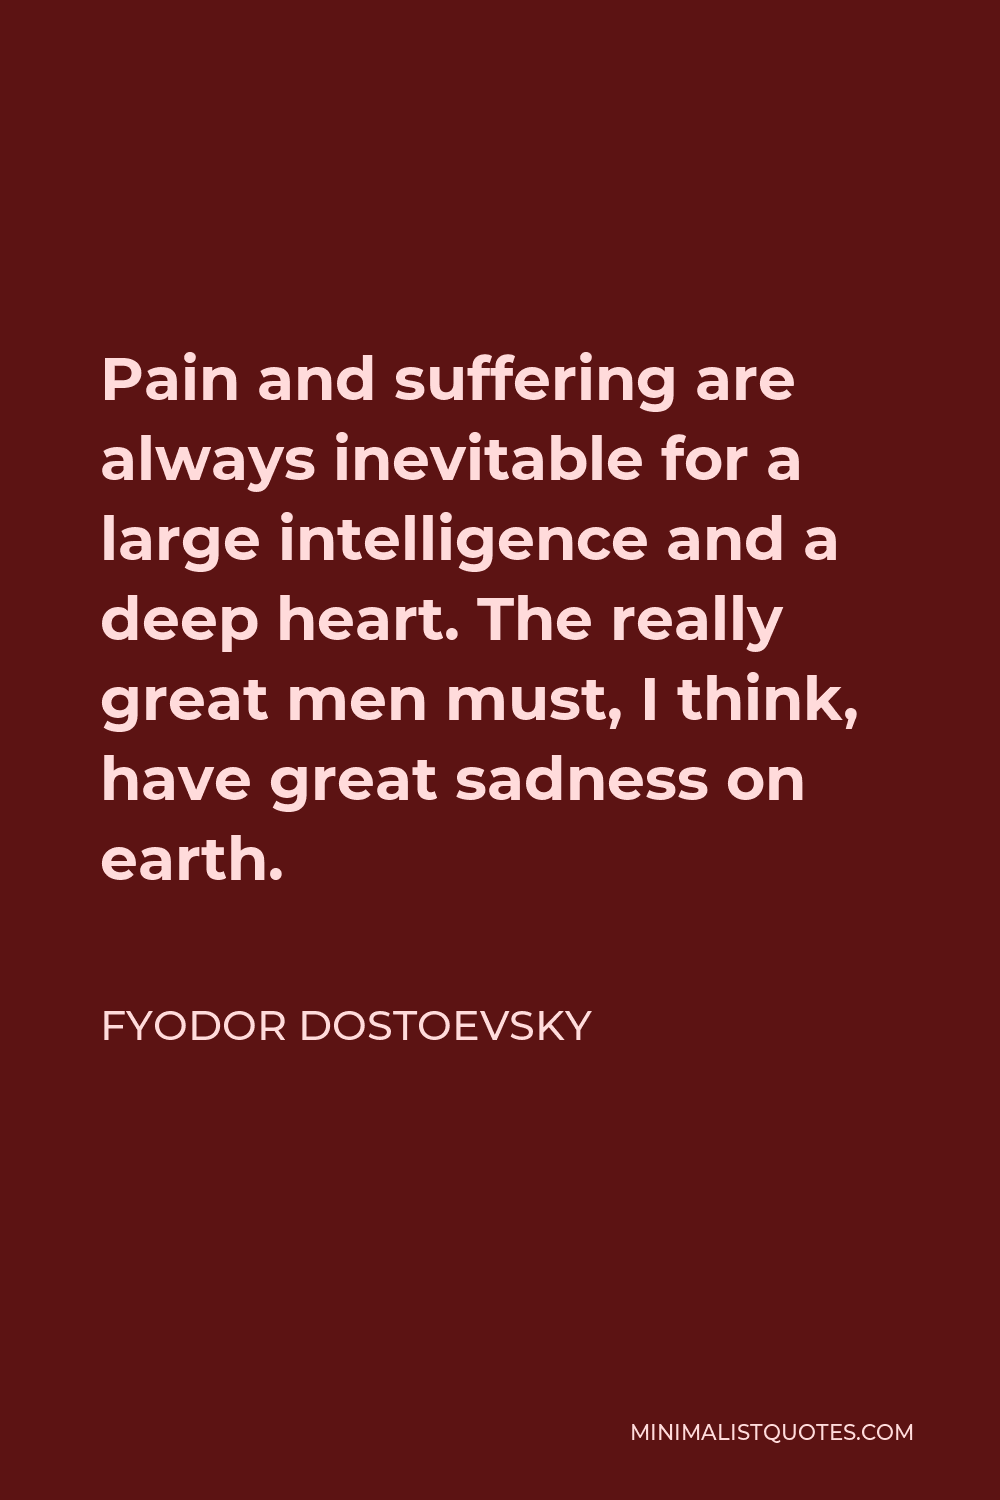 Fyodor Dostoevsky Quote - Pain and suffering are always inevitable for a large intelligence and a deep heart. The really great men must, I think, have great sadness on earth.